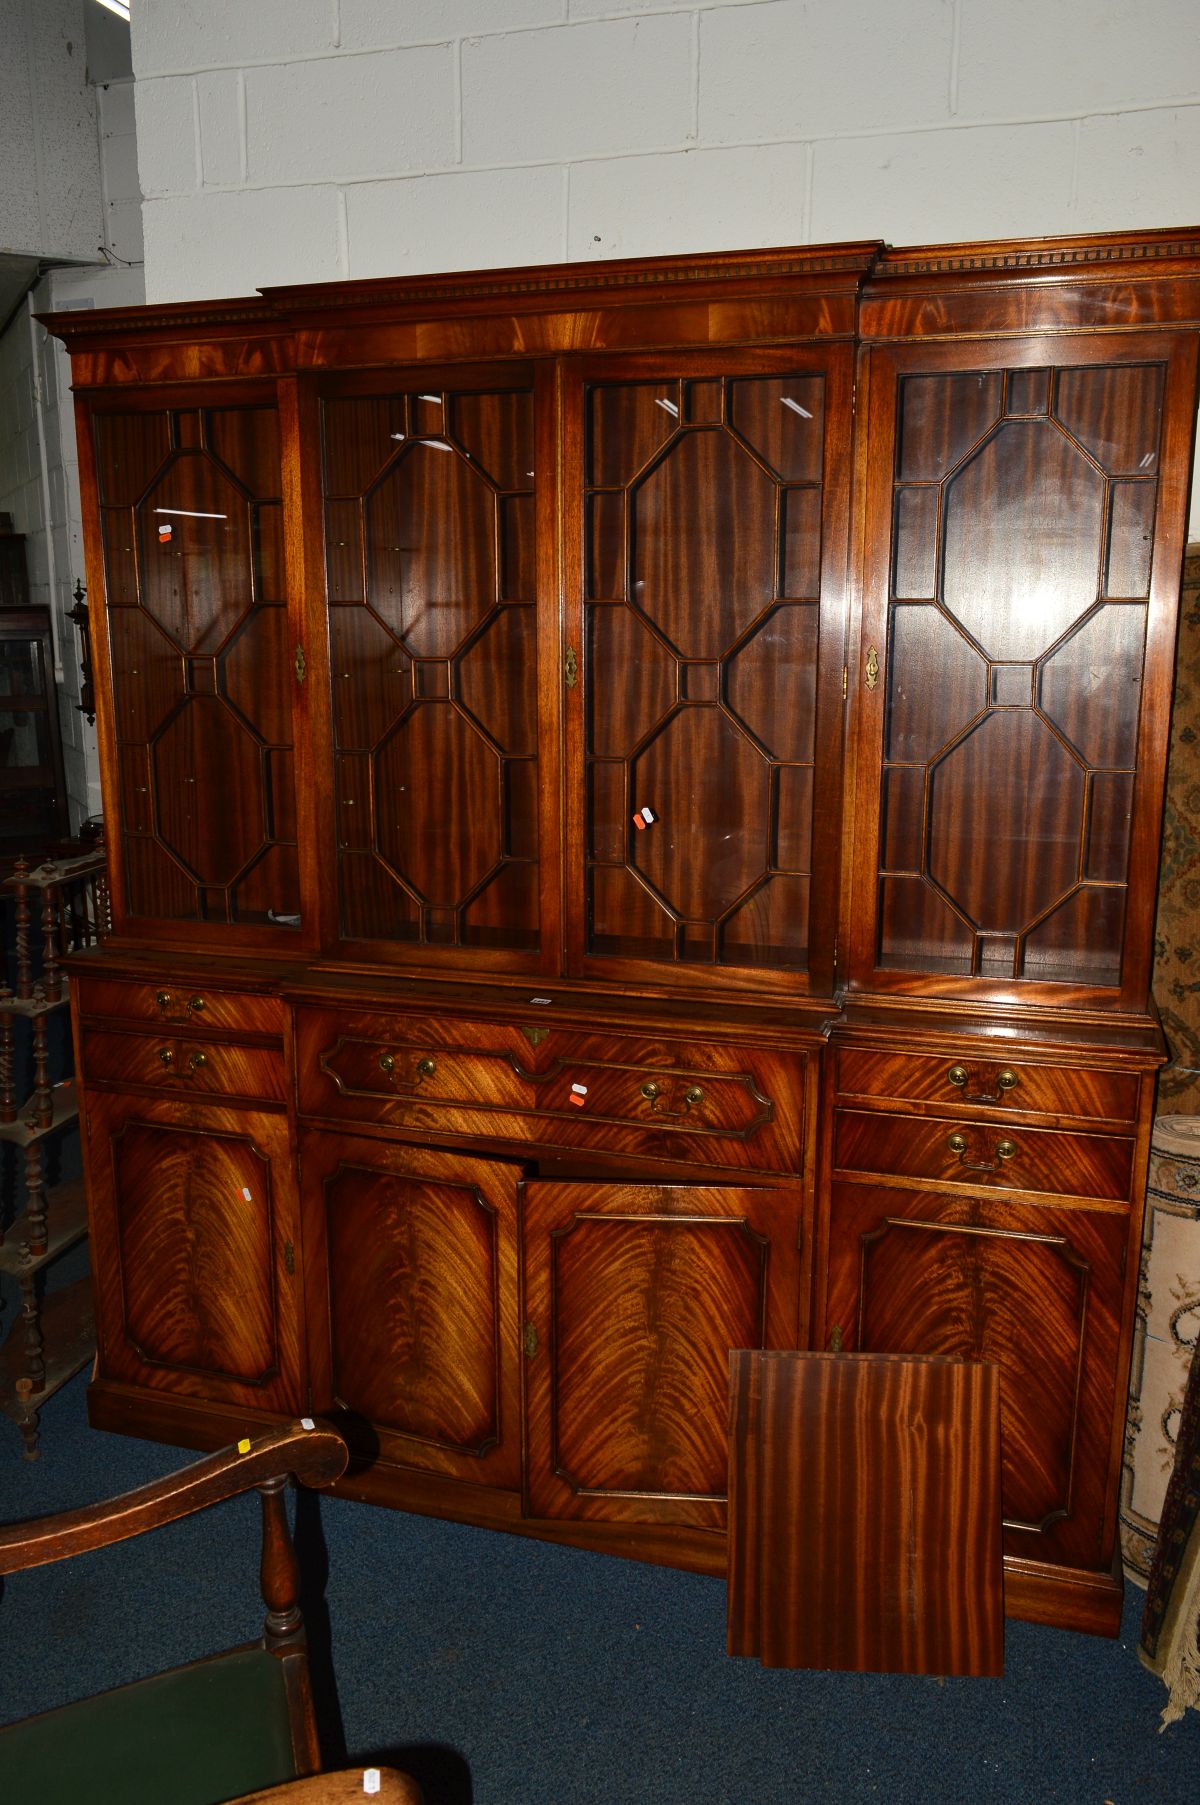 A BEVAN FUNNELL REPRODUX FLAME MAHOGANY BREAKFRONT SECRETAIRE BOOKCASE, the top with four glazed - Image 3 of 3